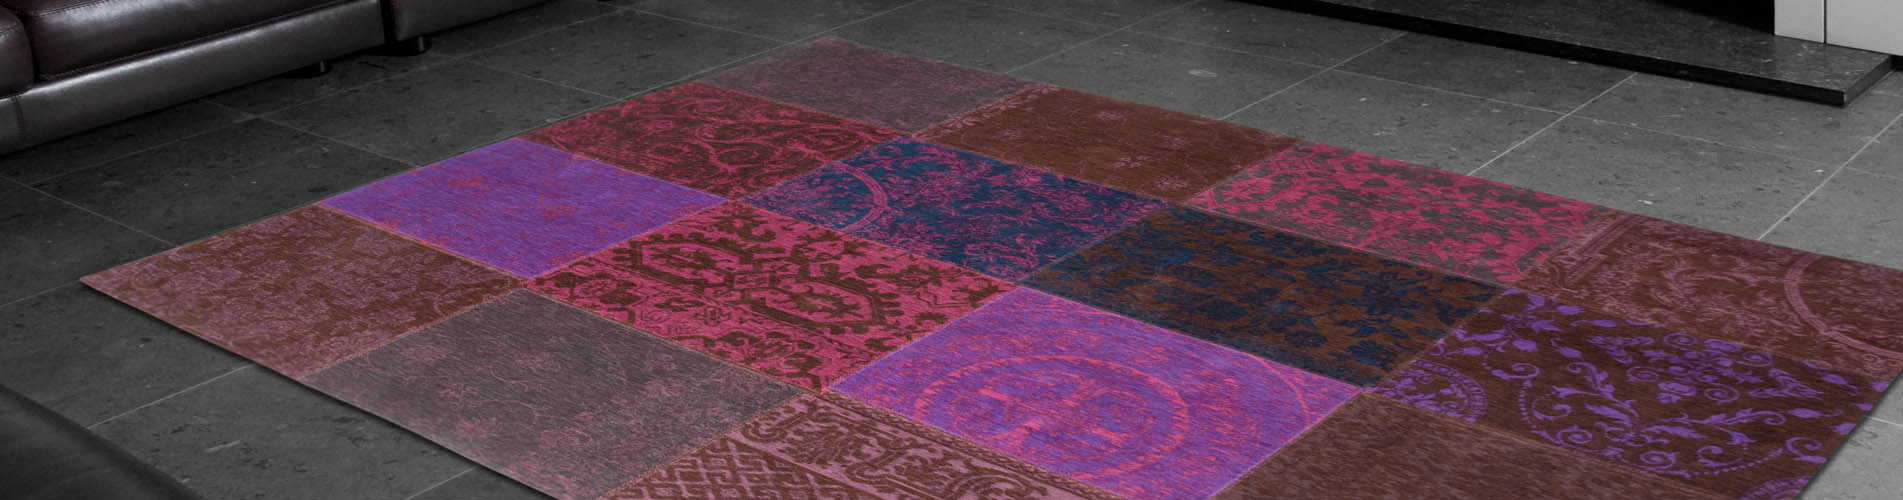 carpets-flooring-and-rugs-page-title-background